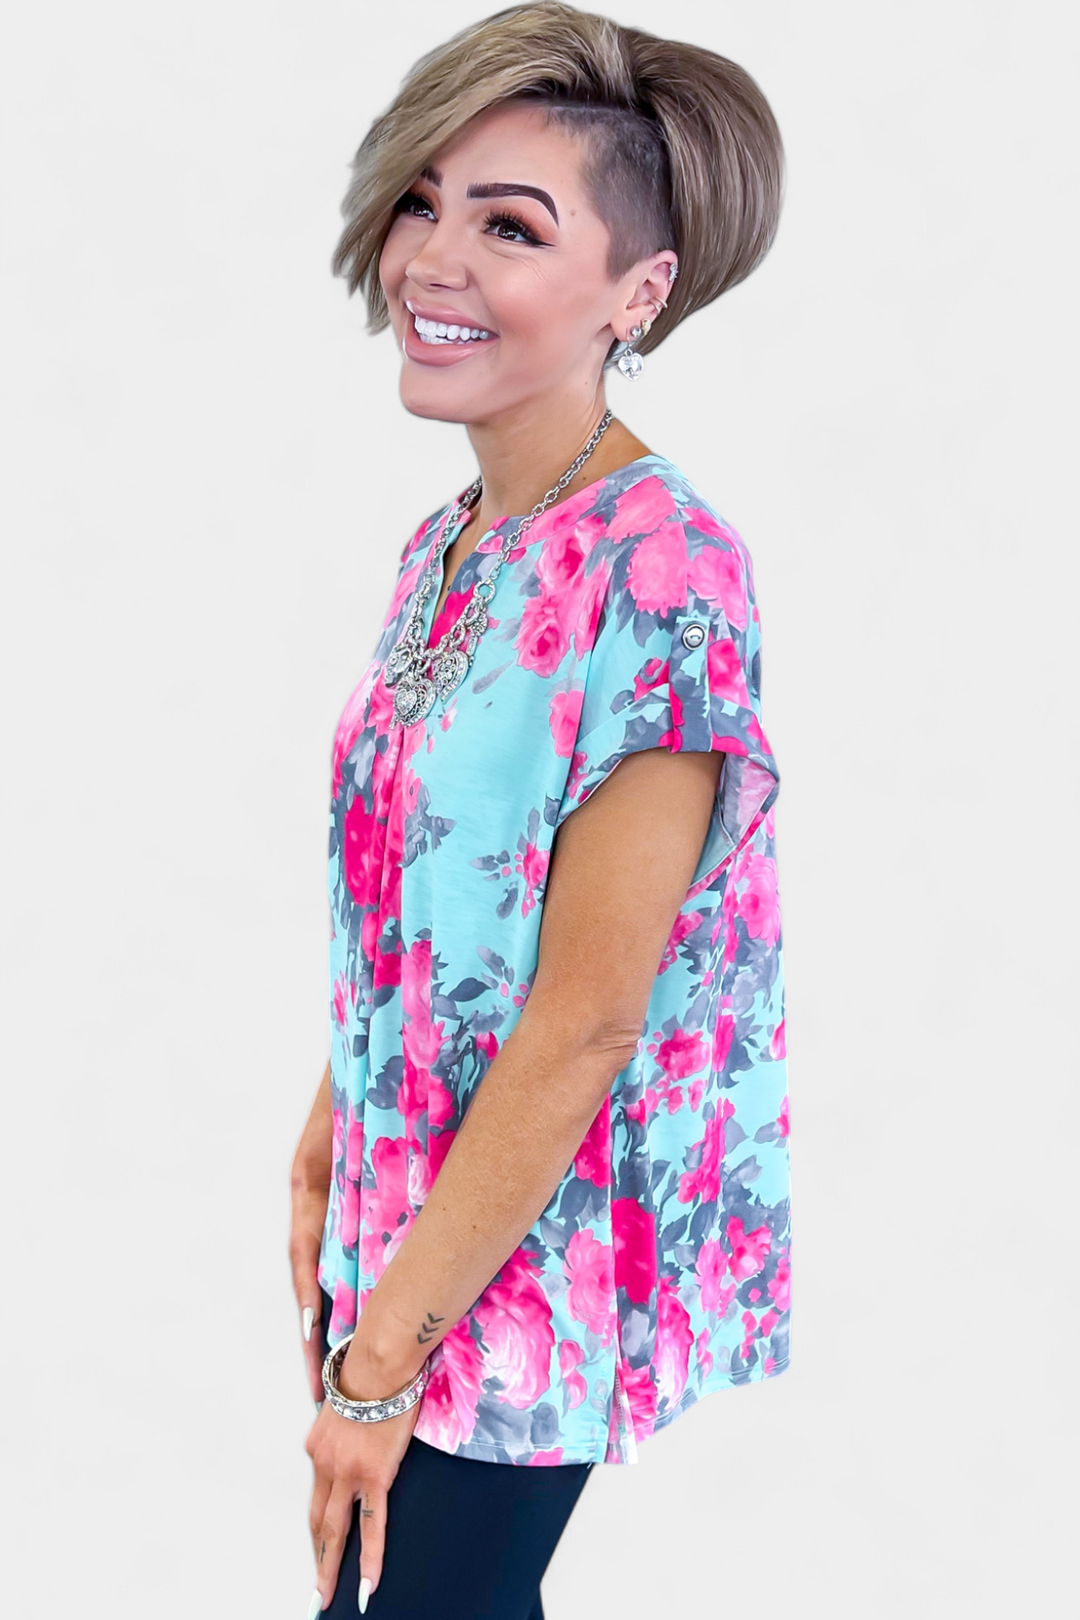 Mint & Pink Floral Lizzy Short Sleeve Top